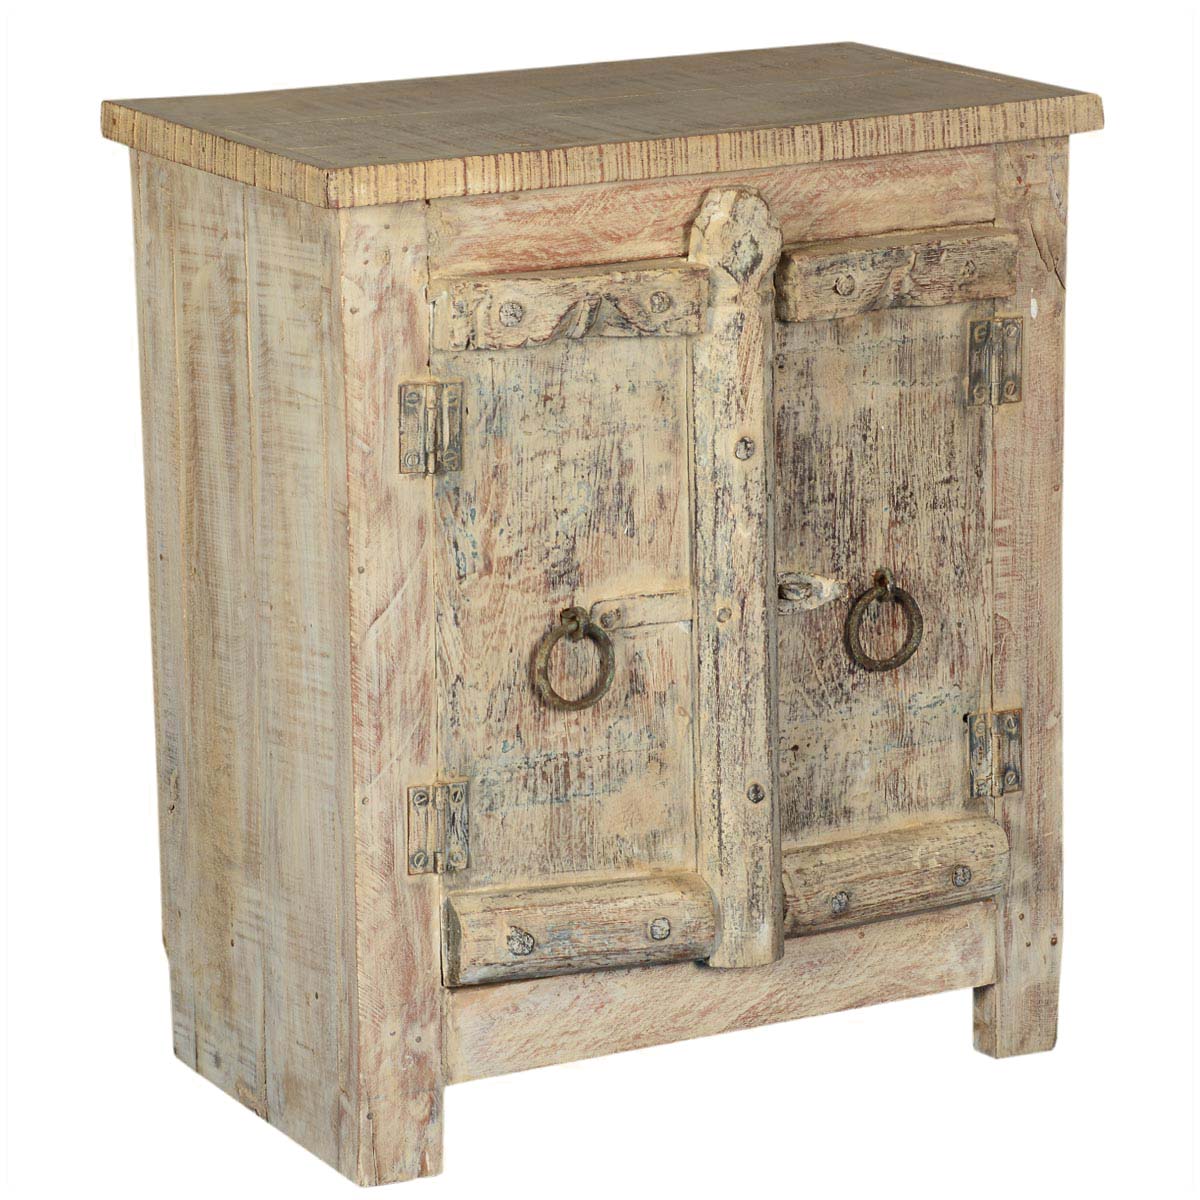 amish door old wood small rustic accent end table storage cabinet most expensive dining round pine custom patio furniture covers leg designs ashley sectional distressed painted